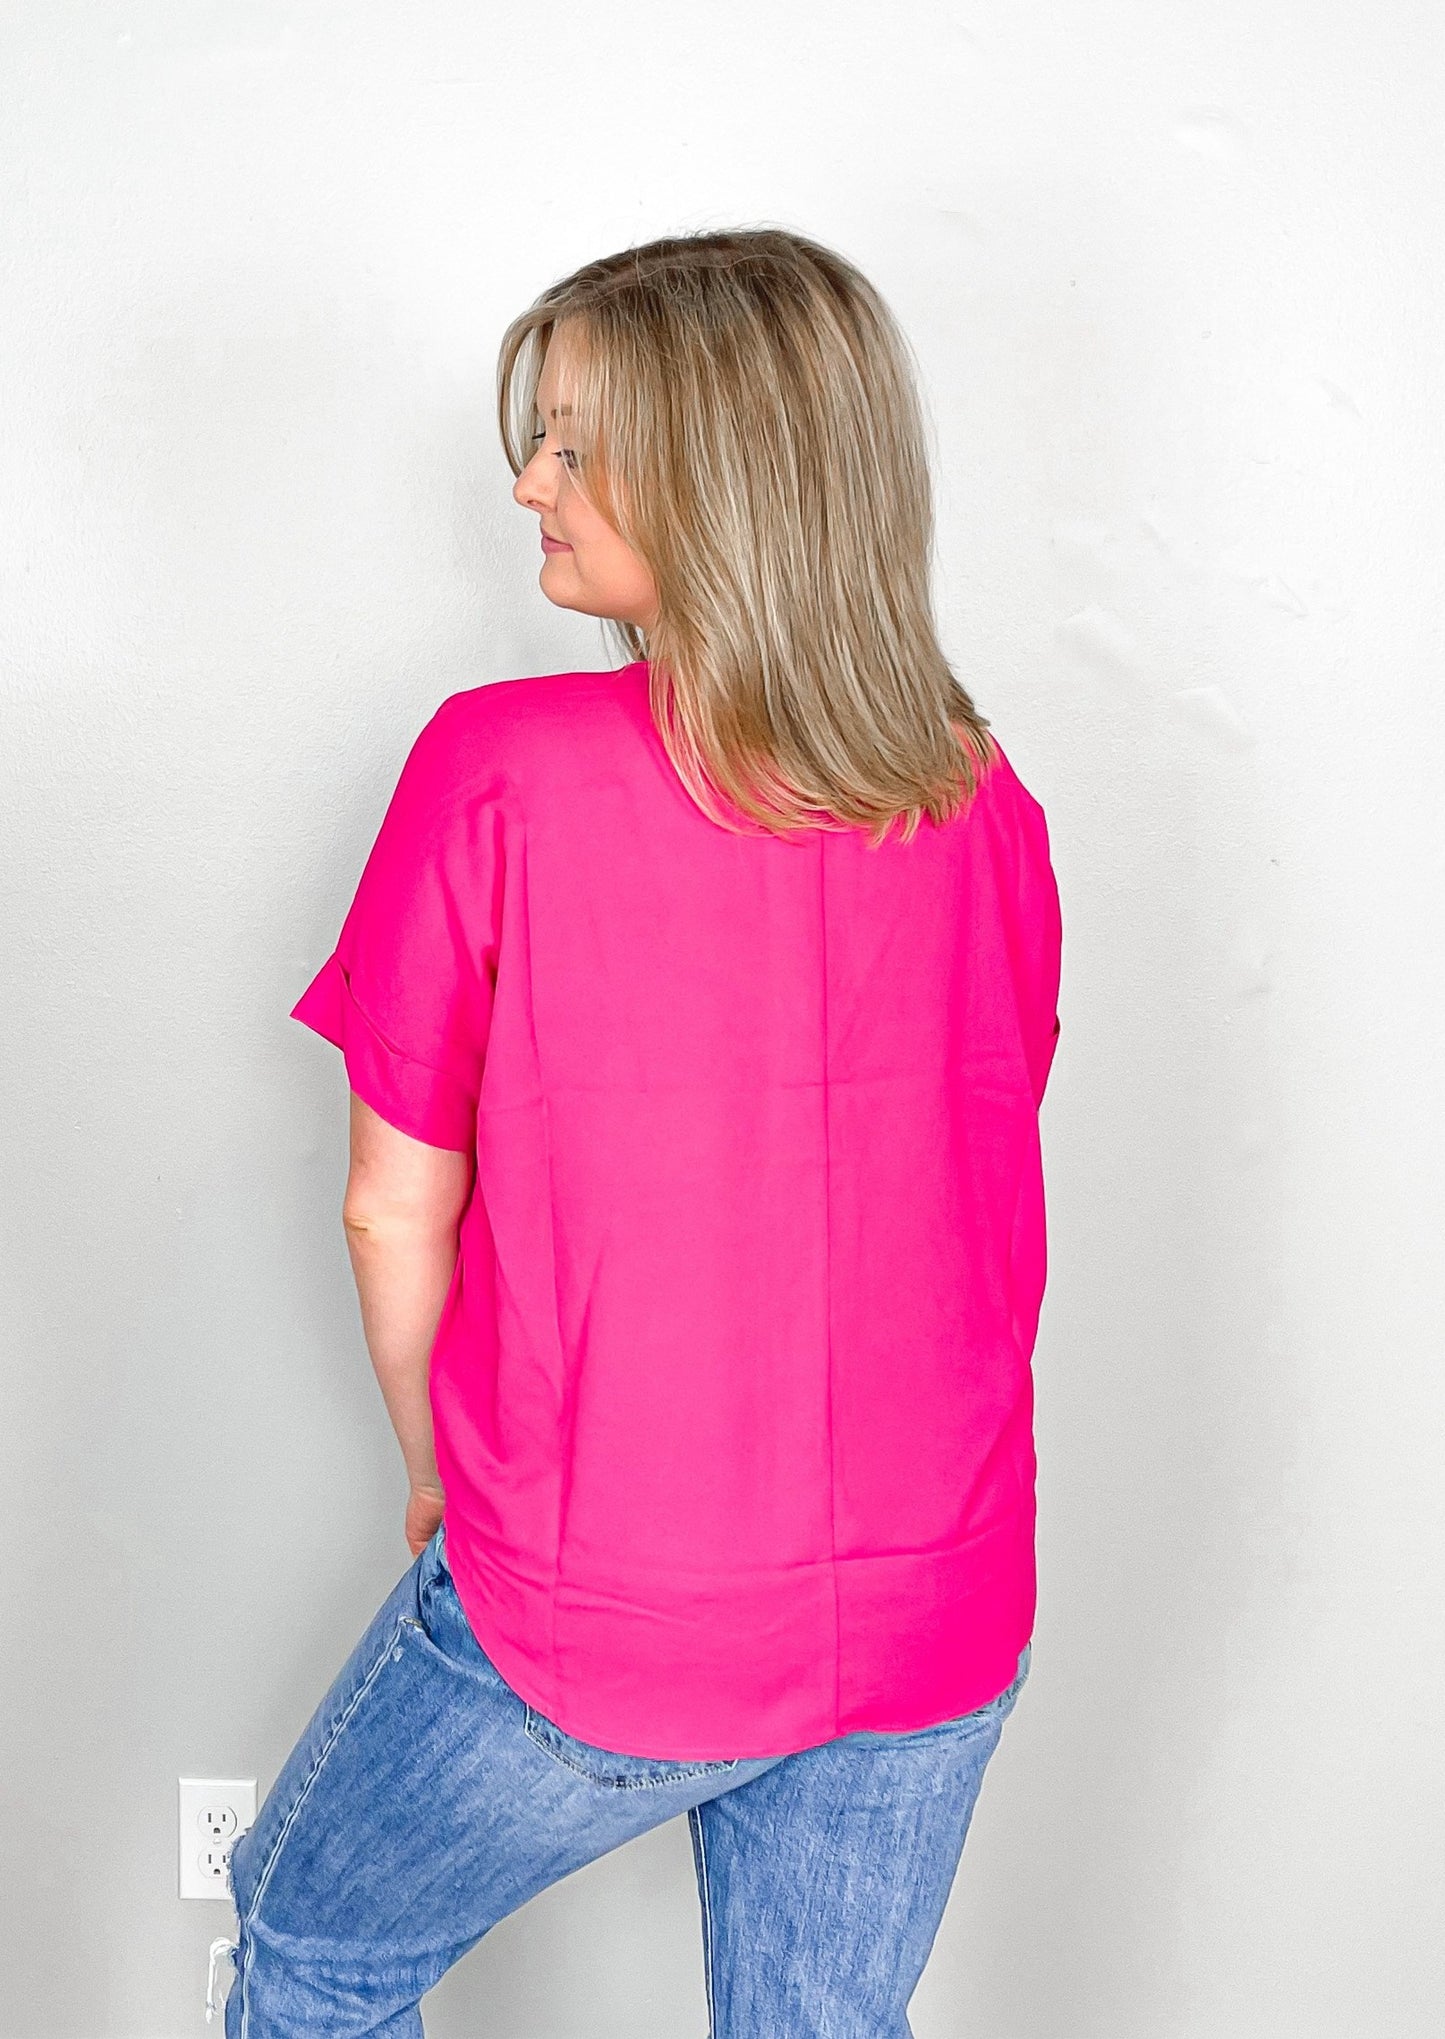 Hallie Short Sleeve Draped Front Top in Hot Pink